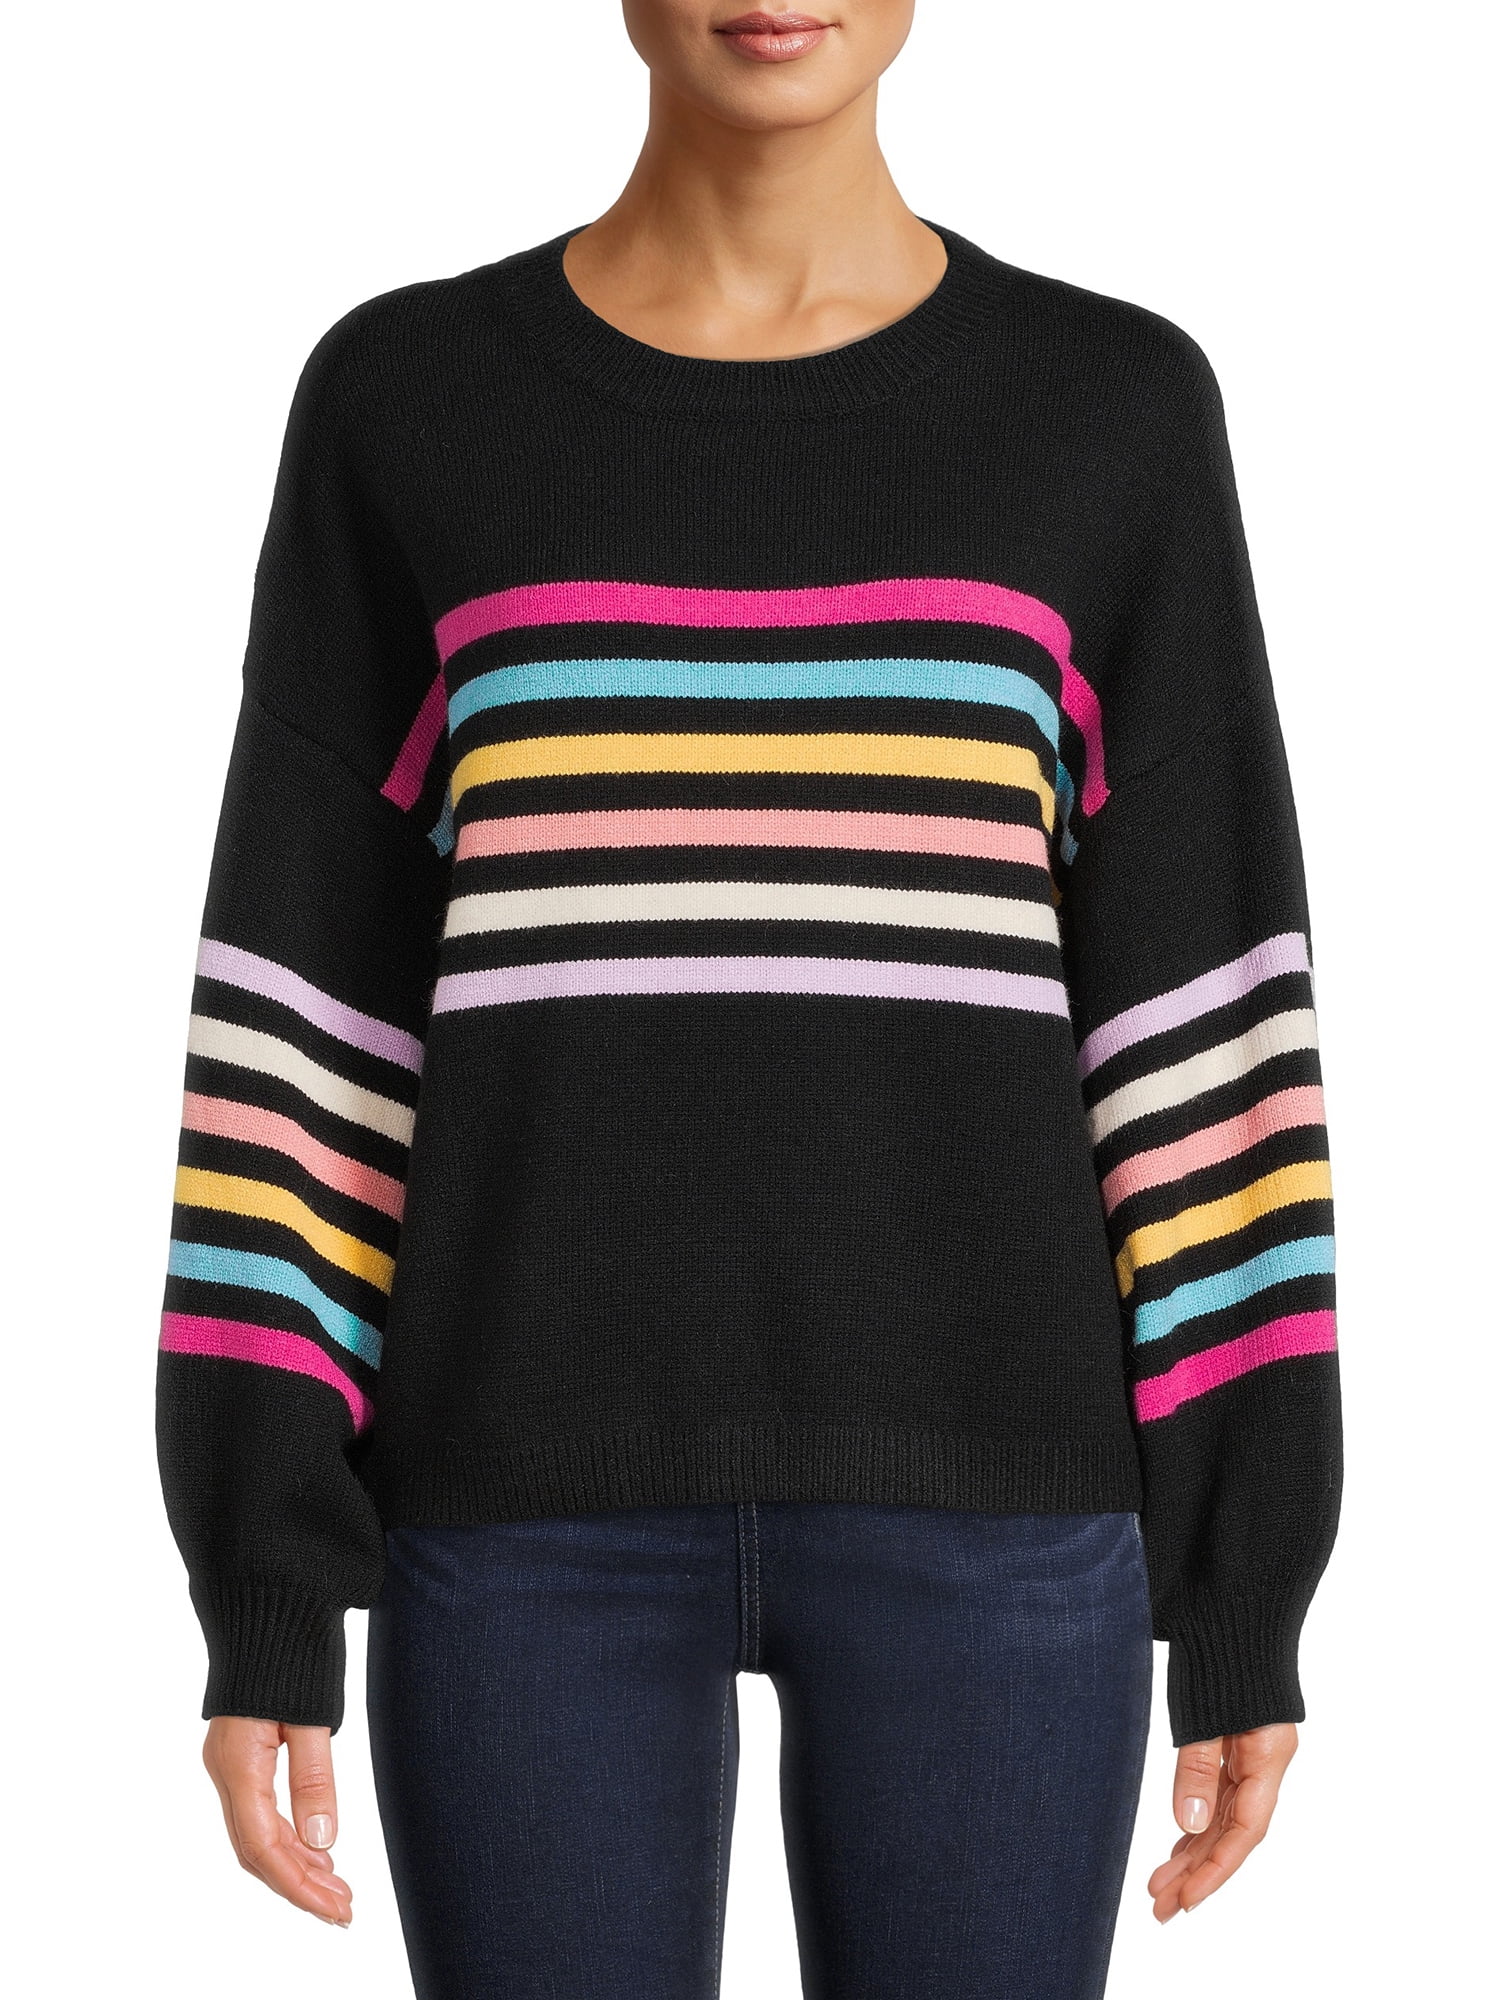 Dreamers by Debut Women's Striped Sweater with Puff Sleeves - Walmart.com